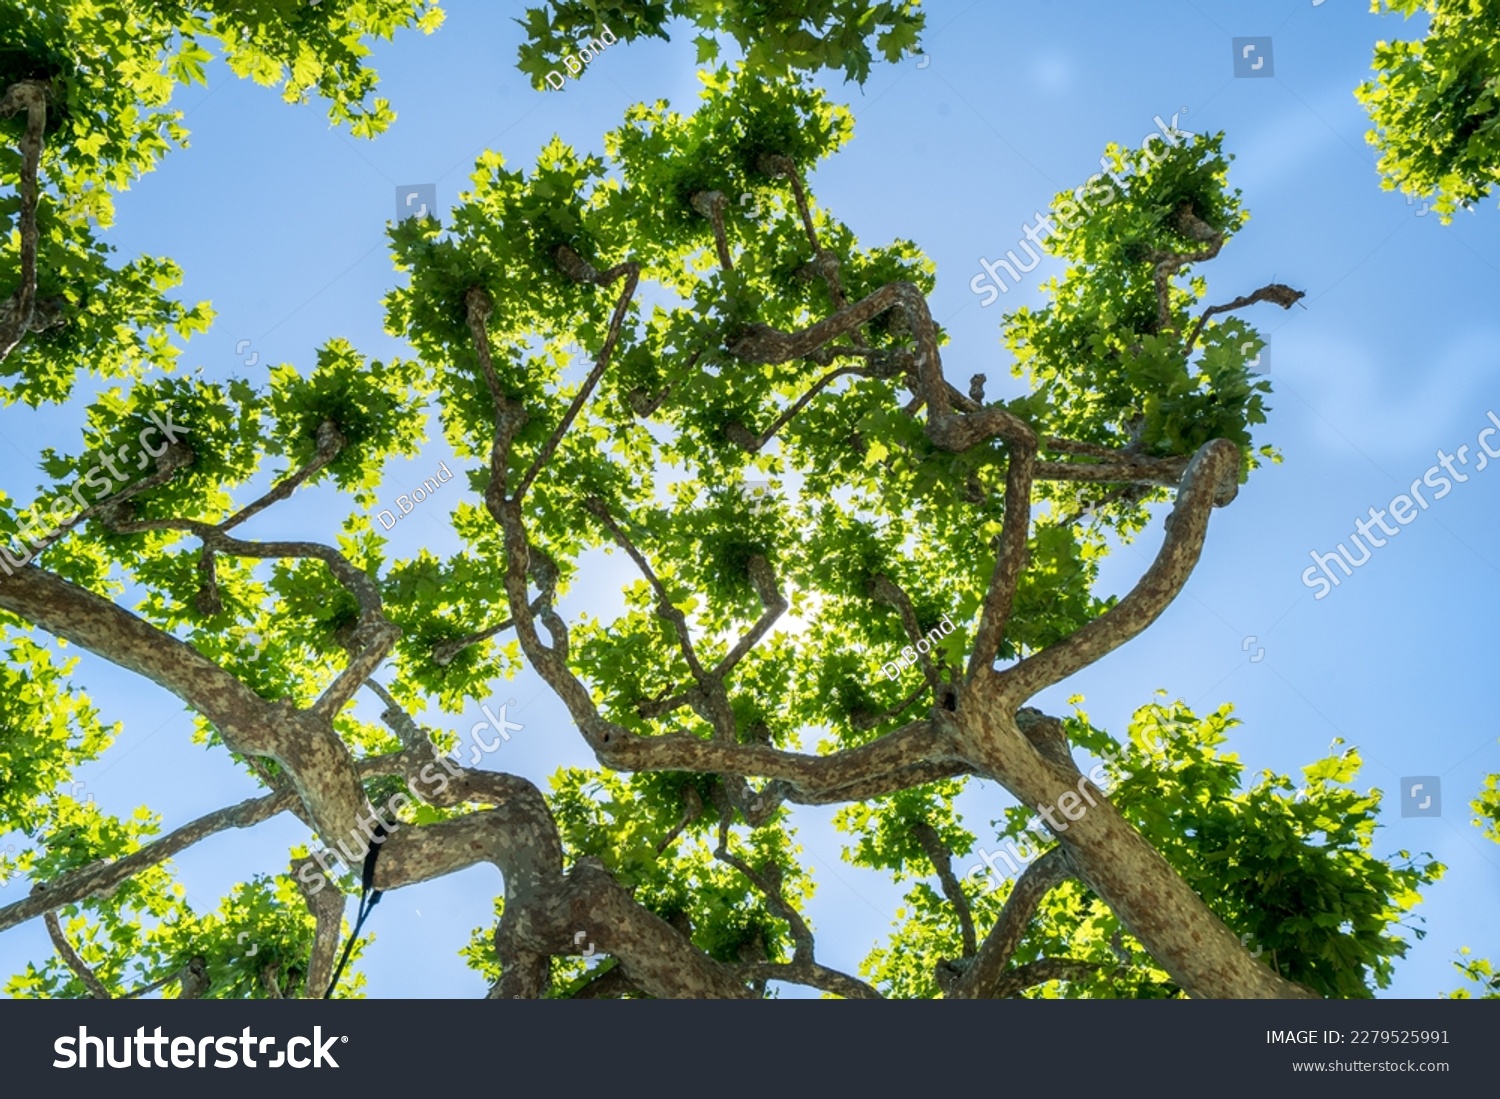 Green Platanus on the blue sky background in spring #2279525991